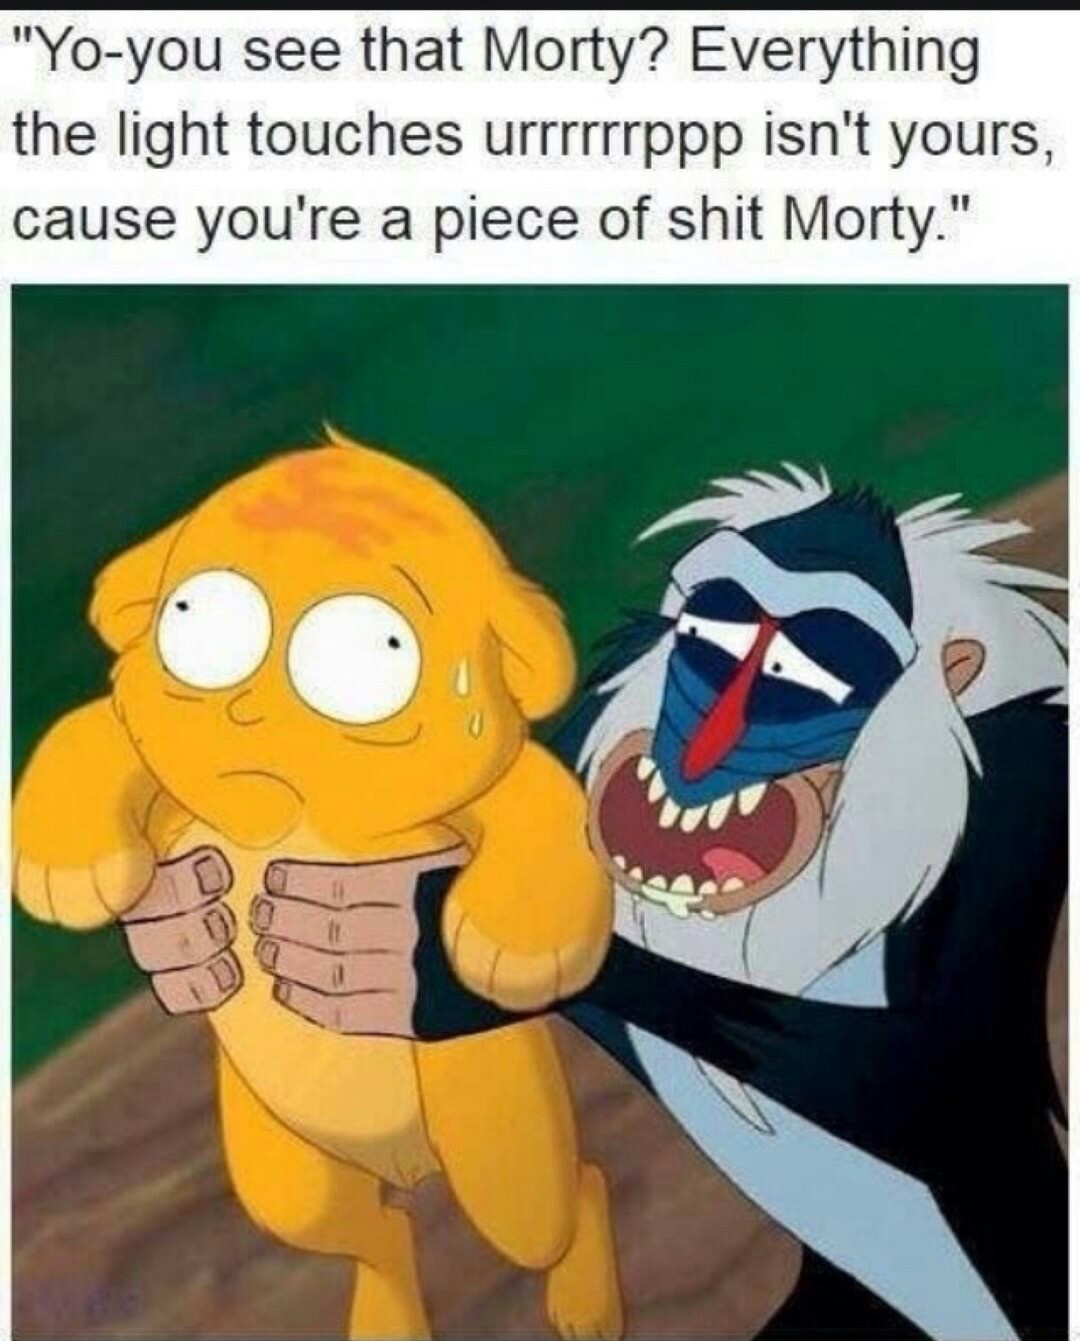 rick and morty lion king - "Yoyou see that Morty? Everything the light touches urrrrrrppp isn't yours, cause you're a piece of shit Morty."